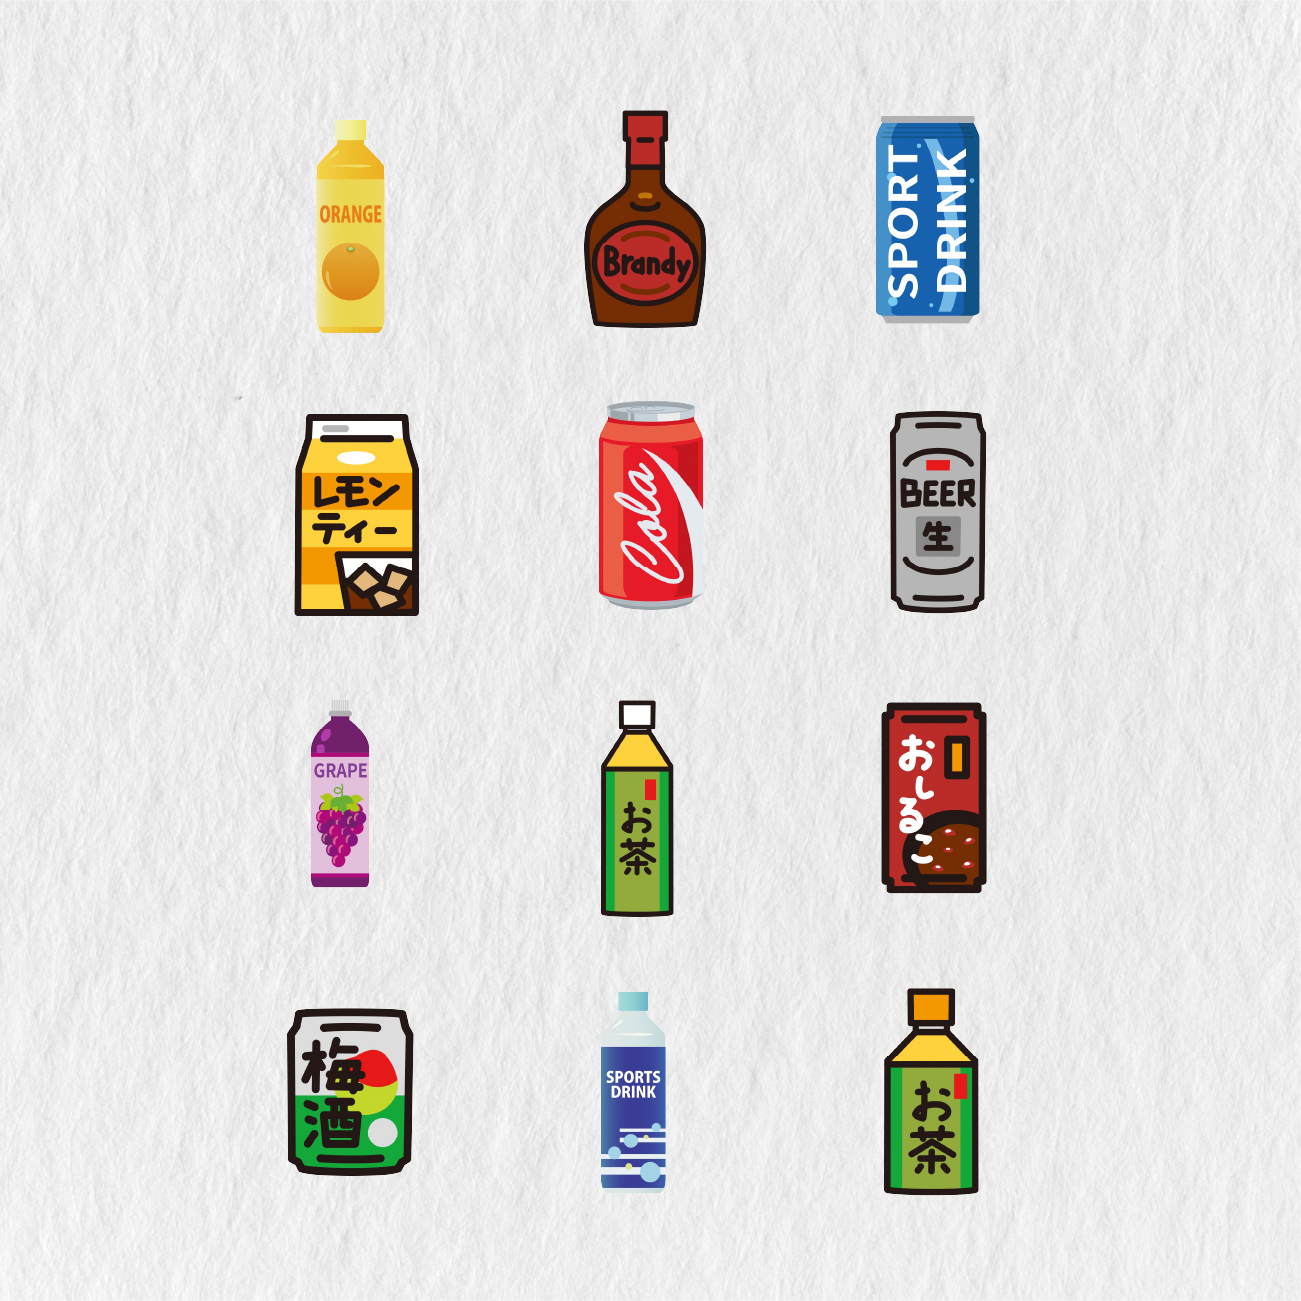 Food and Drink Digital Stickers (Food Stickers, GoodNotes Stickers